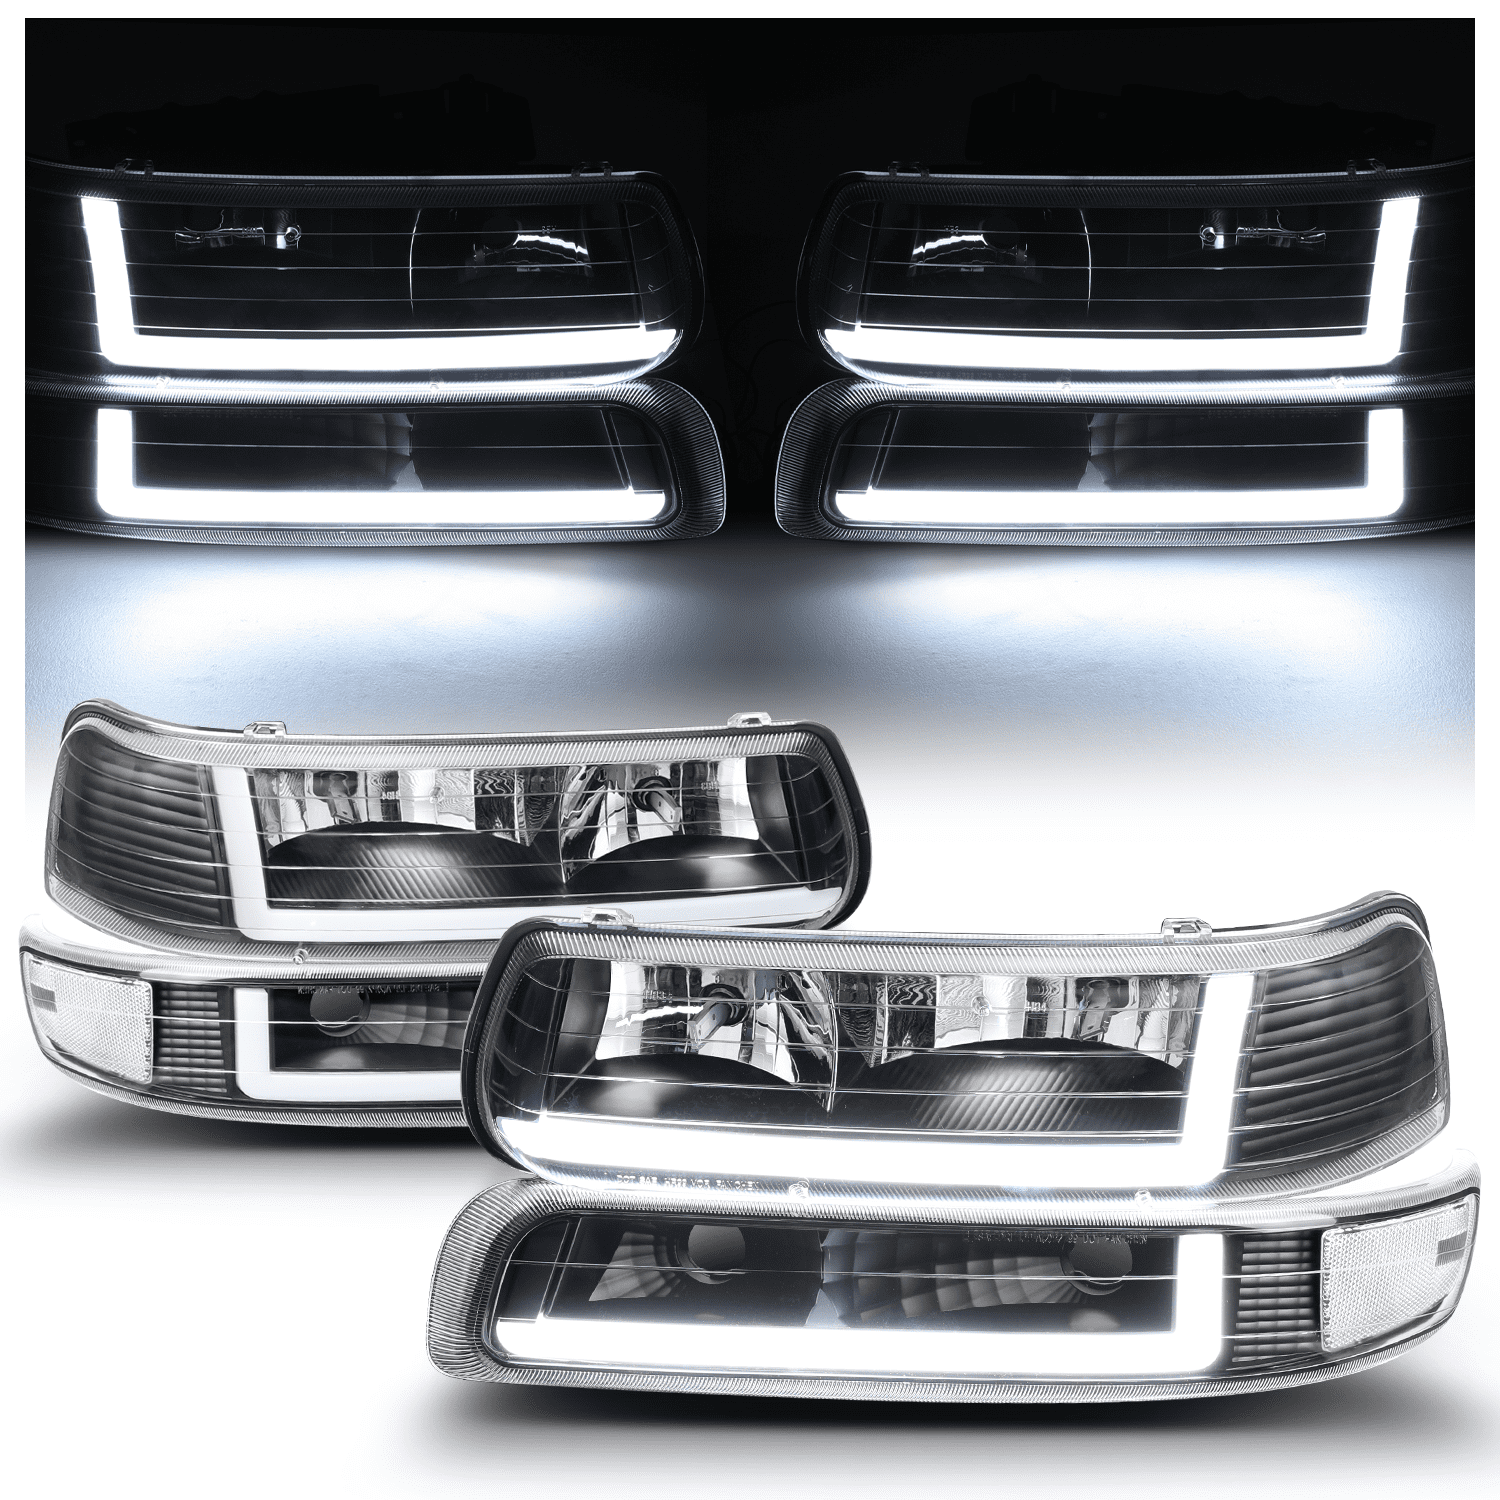 Auto Dynasty 4PCS LED DRL Headlights Assembly and Bumper Lamps Compatible  with Chevy Silverado Suburban 1500 2500 3500 Tahoe 99-06, Driver and  Passenger Side, Smoked Lens Clear Corner : Automotive 